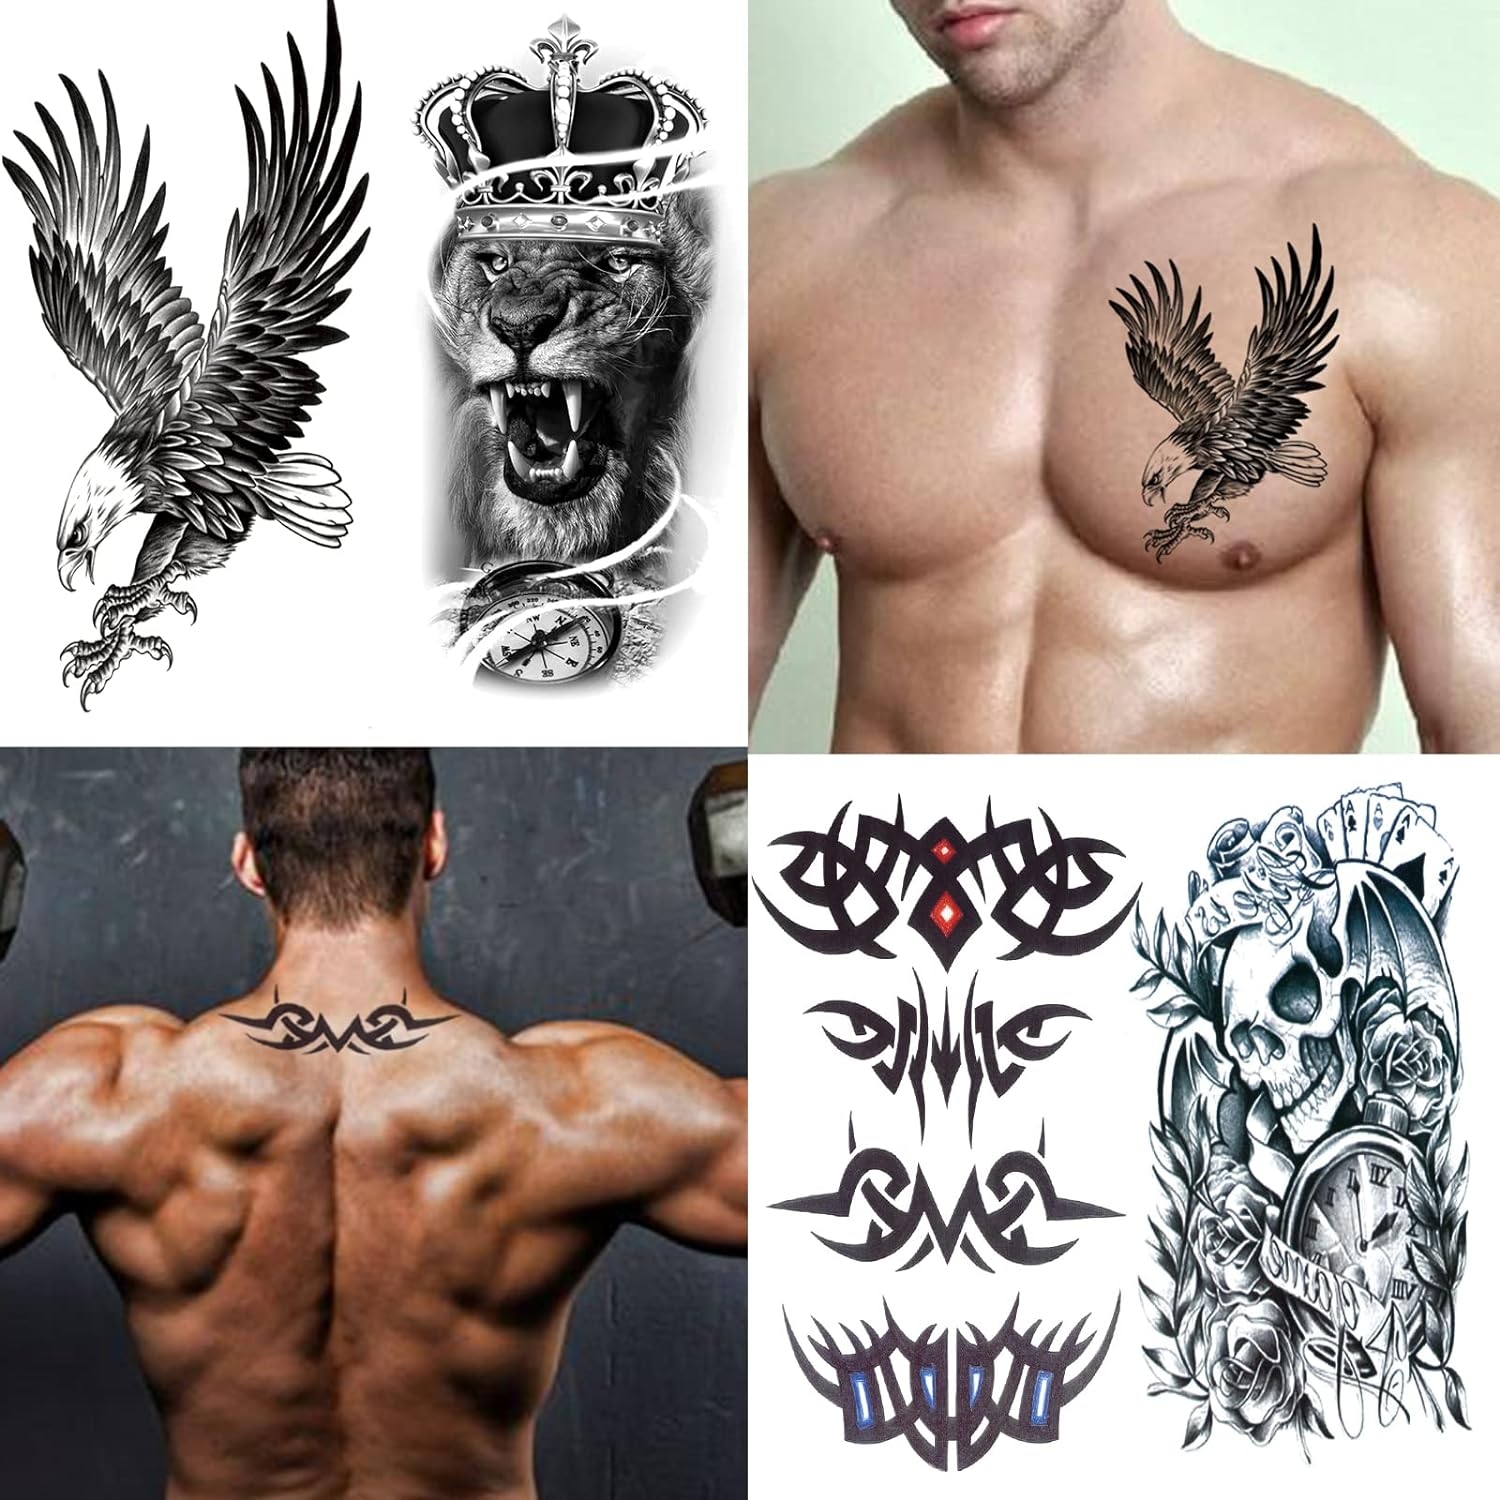 62 Sheets Temporary Tattoos Stickers, Fake Body Arm Chest Shoulder Tattoos for Men and Women, Halloween Temporary Tattoos Black Fake Skull Skeleton Tattoos for Halloween Cosplay